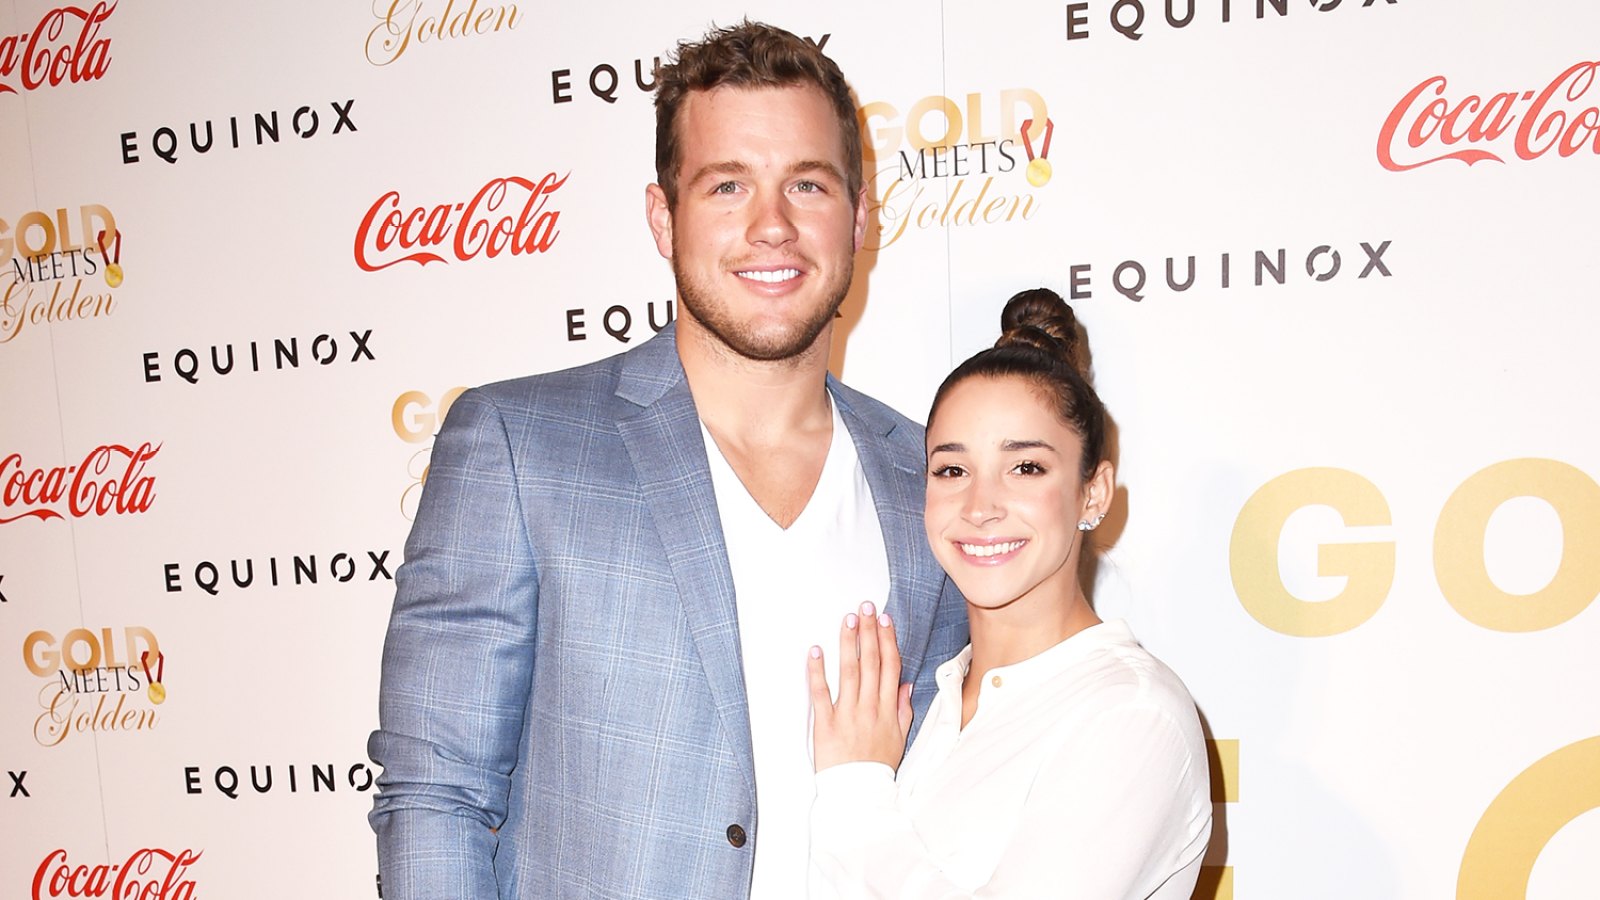 Aly Raisman and Colton Underwood attend Life is Good at GOLD MEETS GOLDEN Event at Equinox on January 7, 2017 in Los Angeles, California.